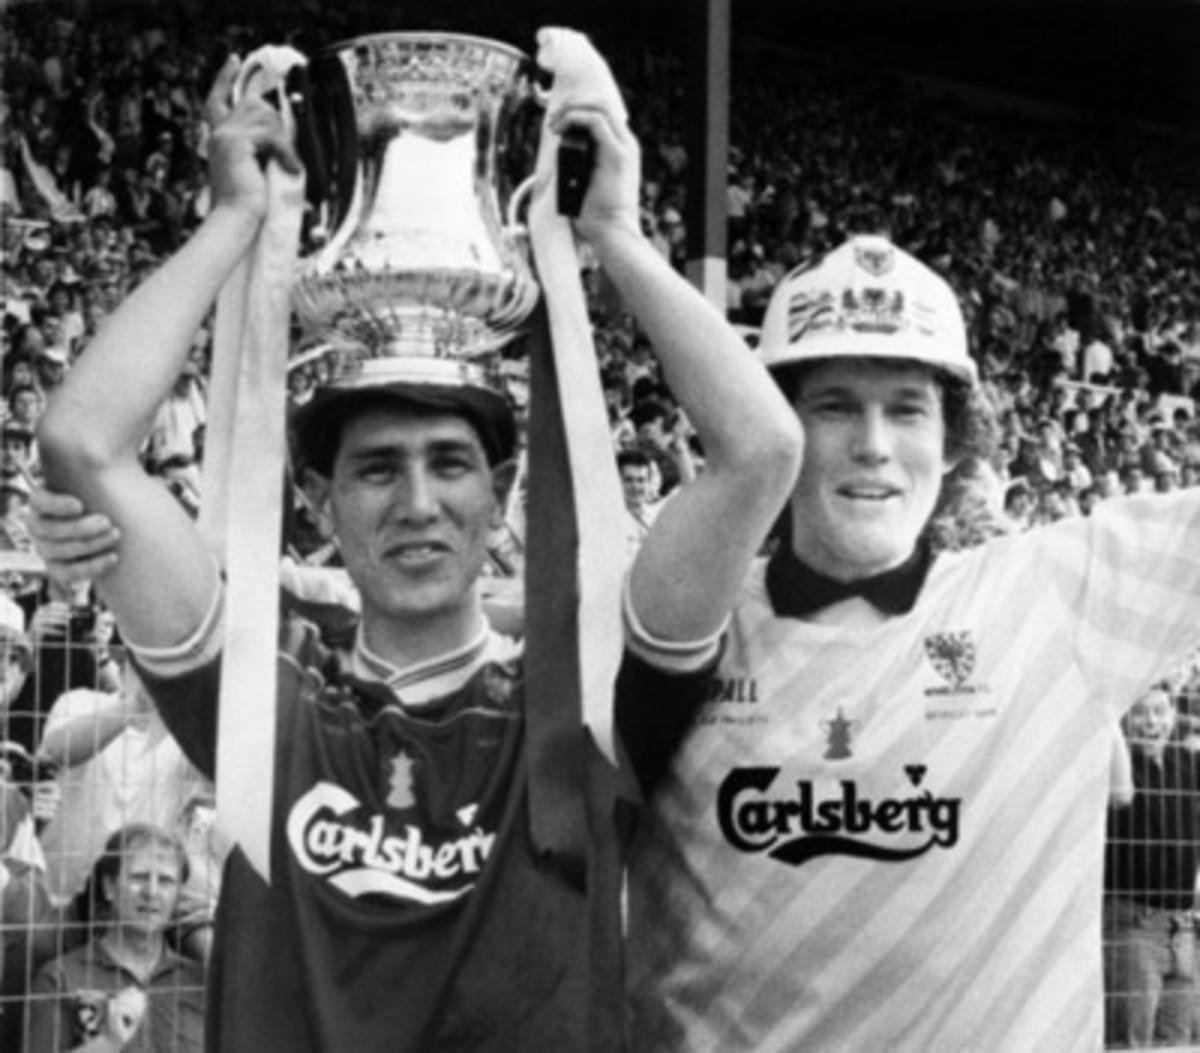 Wimbledon's Lawrie Sanchez holds the FA Cup as captain and goalkeeper David Beasant acknowledges the fans after defeating Liverpool 1-0 in the 1988 FA Cup final.